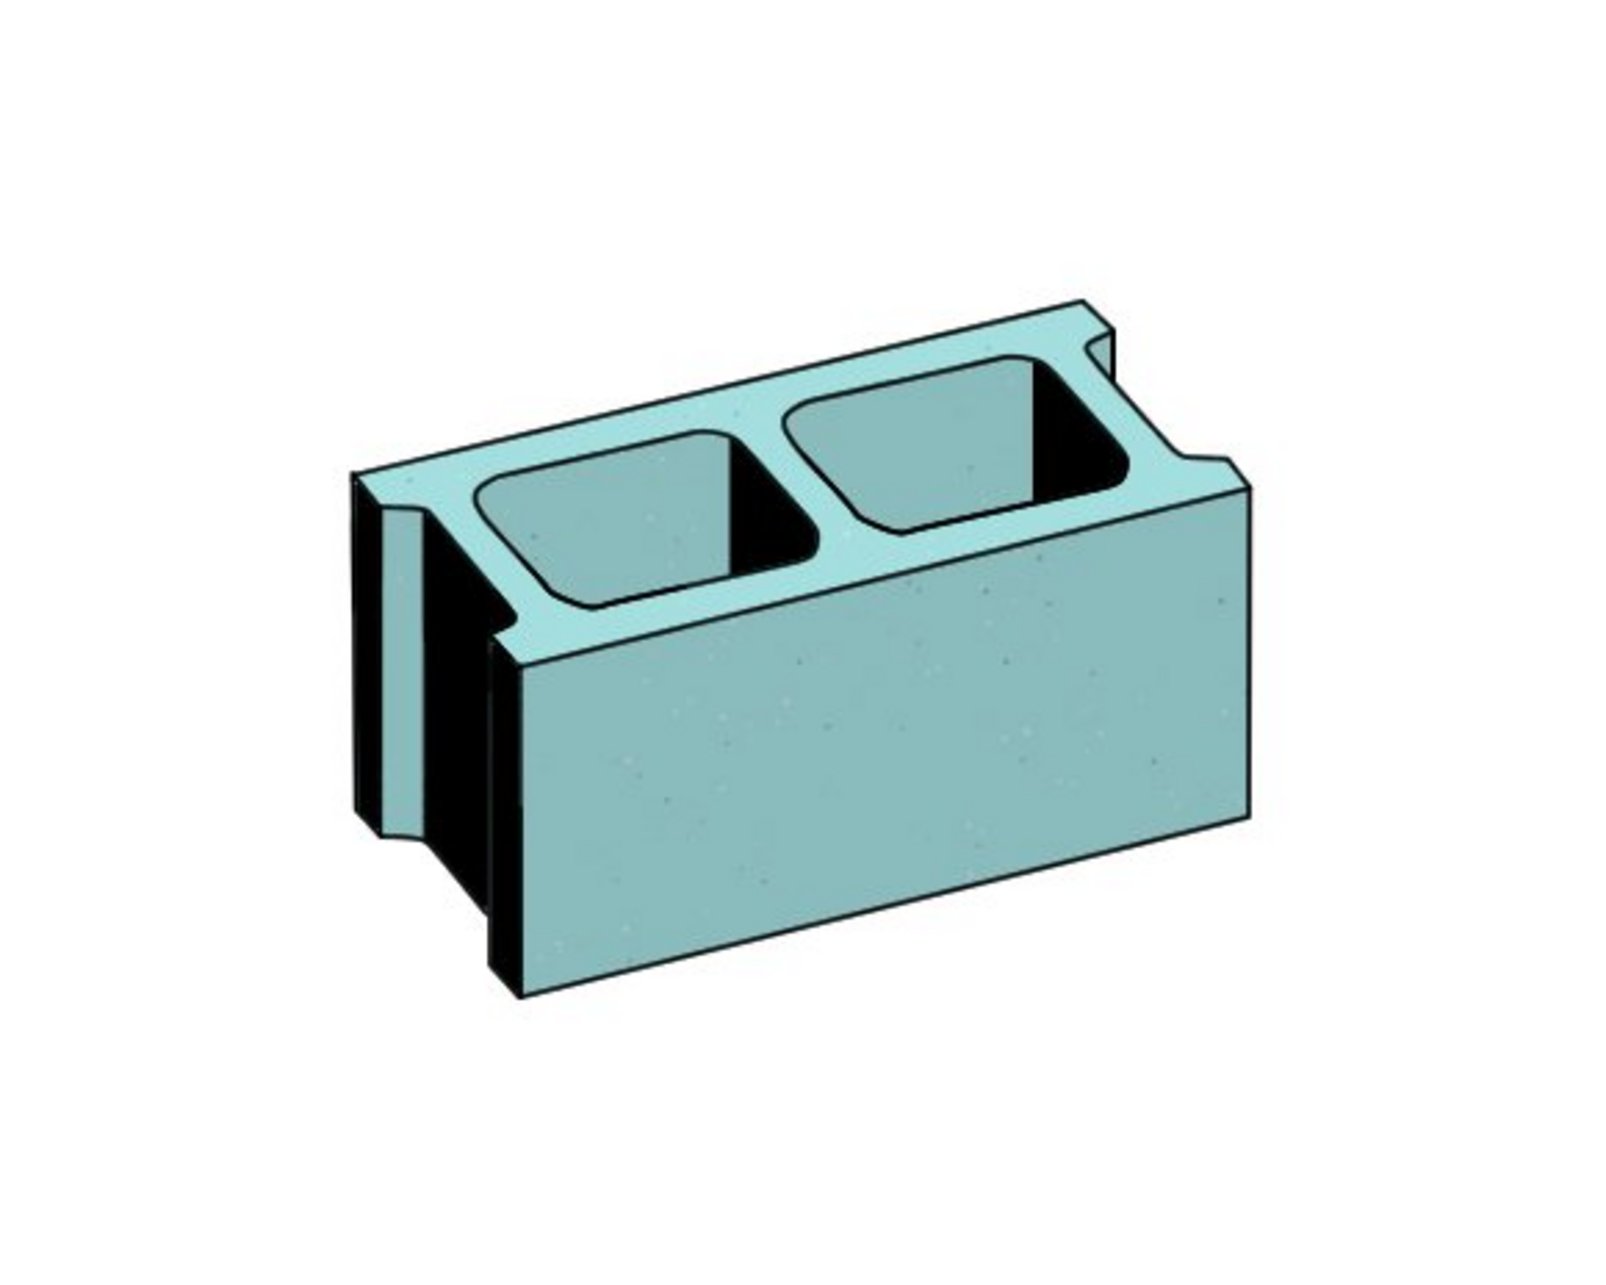 Illustration of a turquoise component on a white background